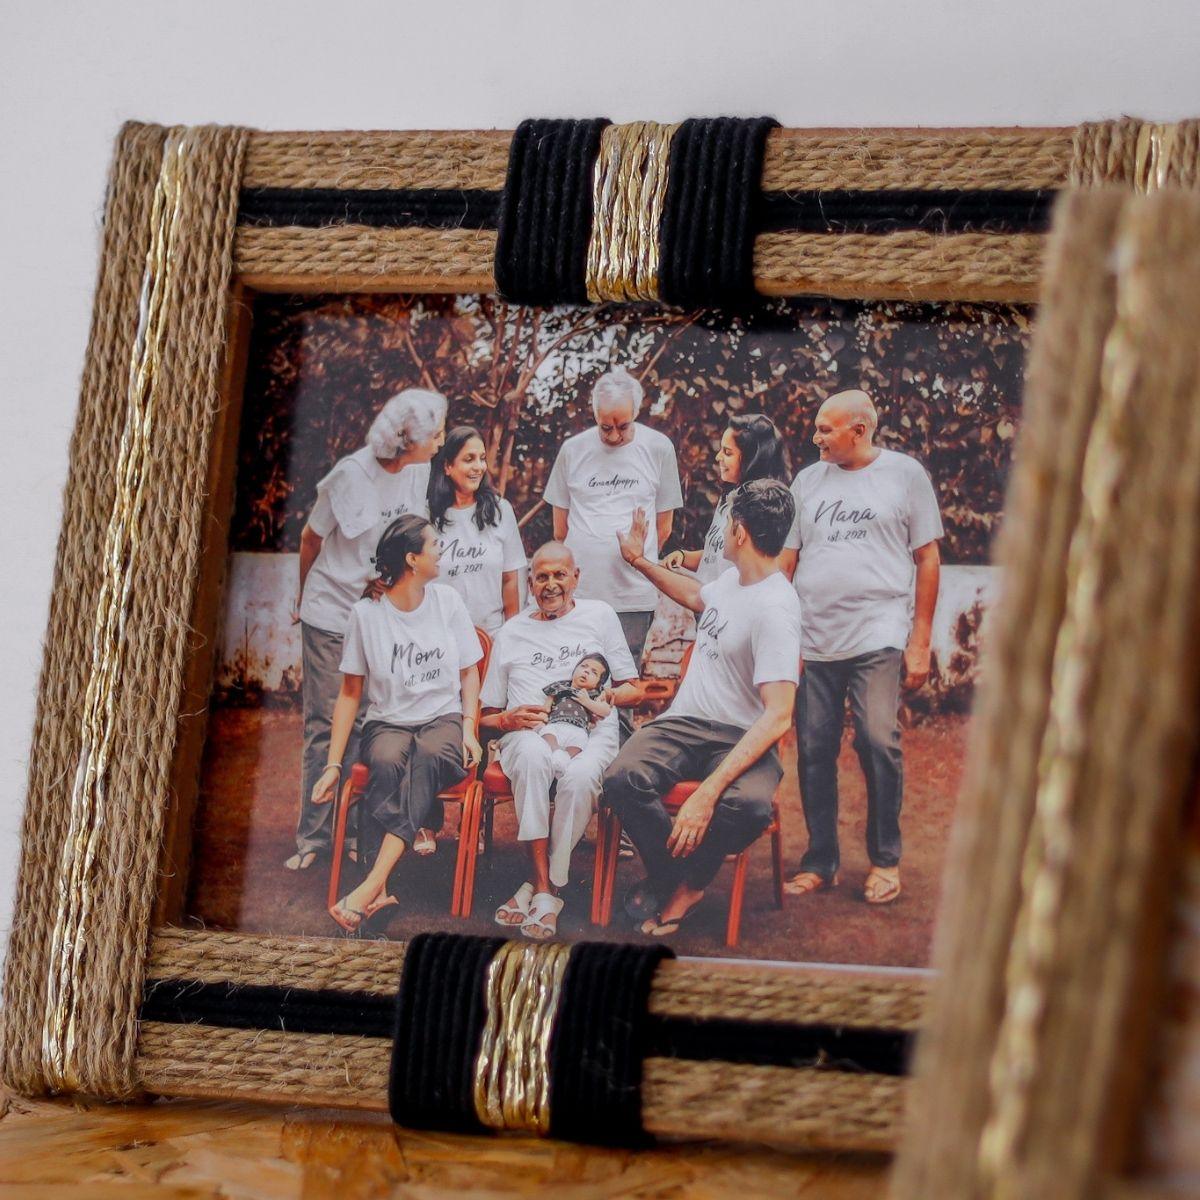 Zila Natural Jute & Gold Plastic Photo Frame - Sirohi.org - Colour_Black, Colour_Gold, Colour_Jute Beige, Purpose_Home Accessory, Rope Material_Natural Jute Fibre, Rope Material_Plastic Waste, Rope Material_Recycled Cotton